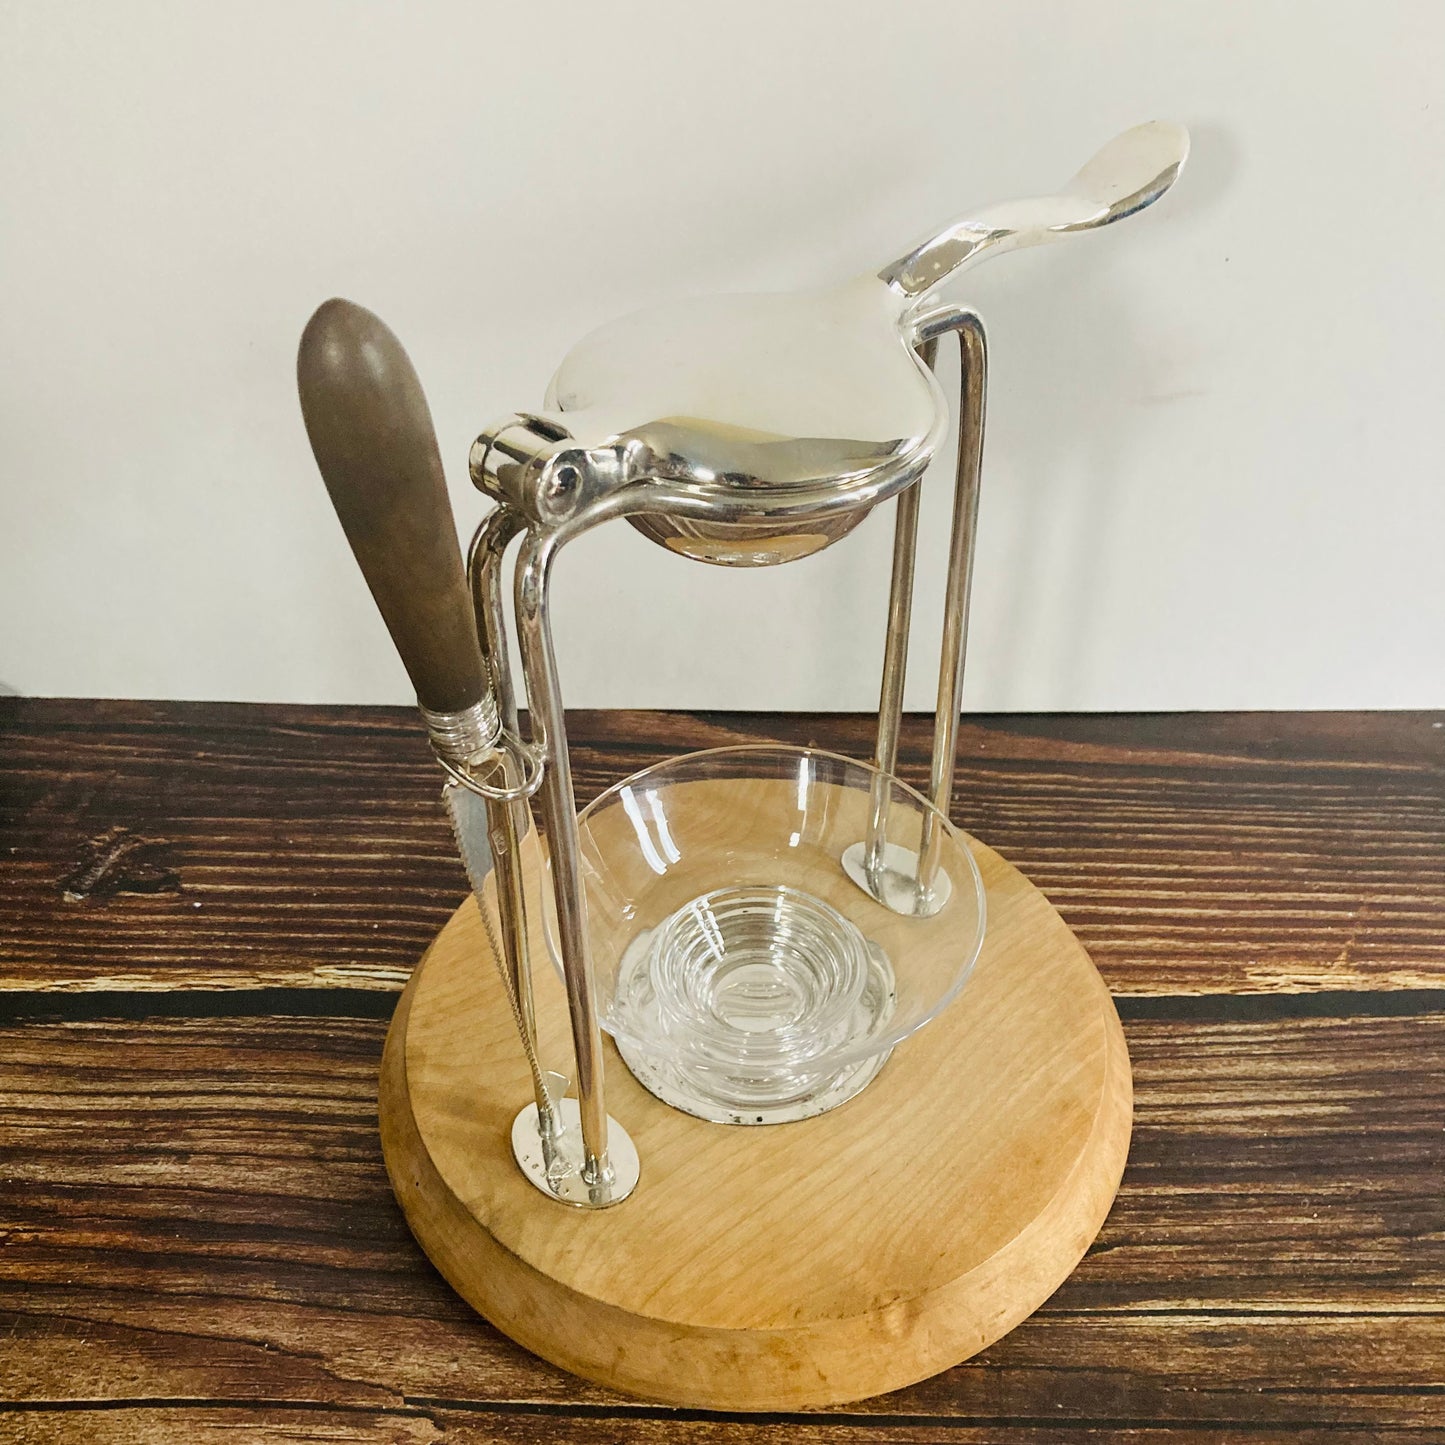 The Duchess Tyler - Antique Silver and Wooden Lemon Juicer